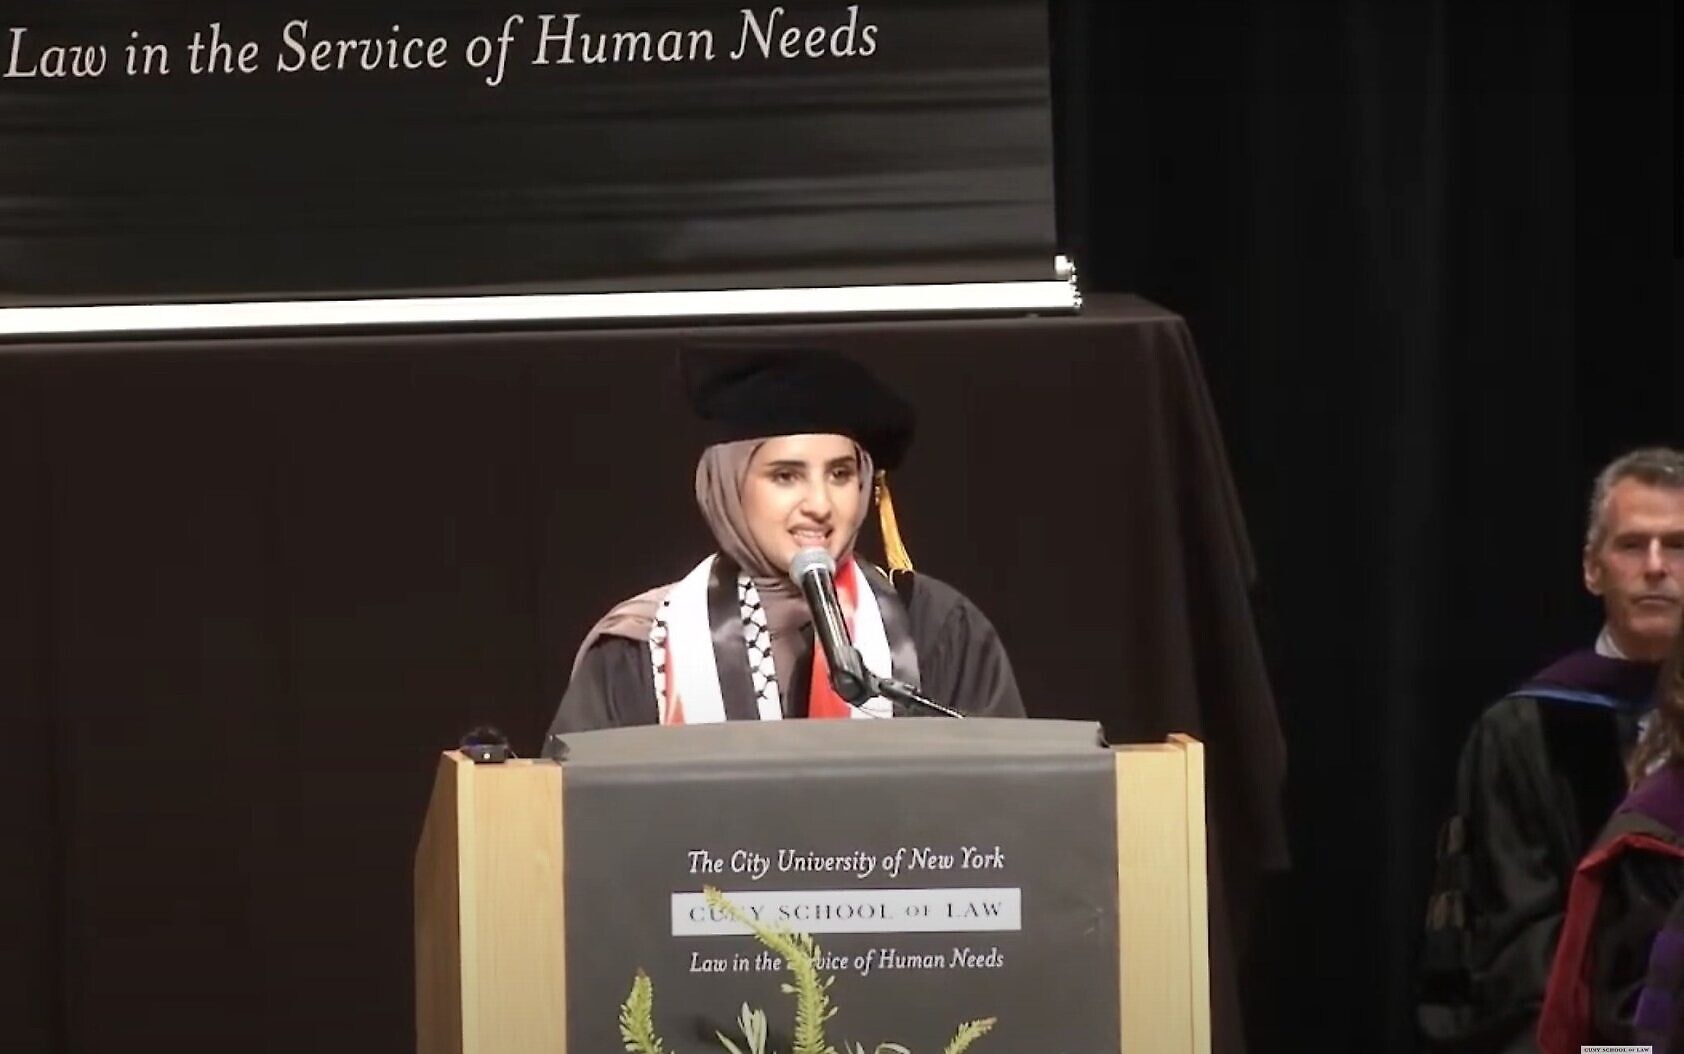 NYC's public law school releases video of 'antisemitic' commencement